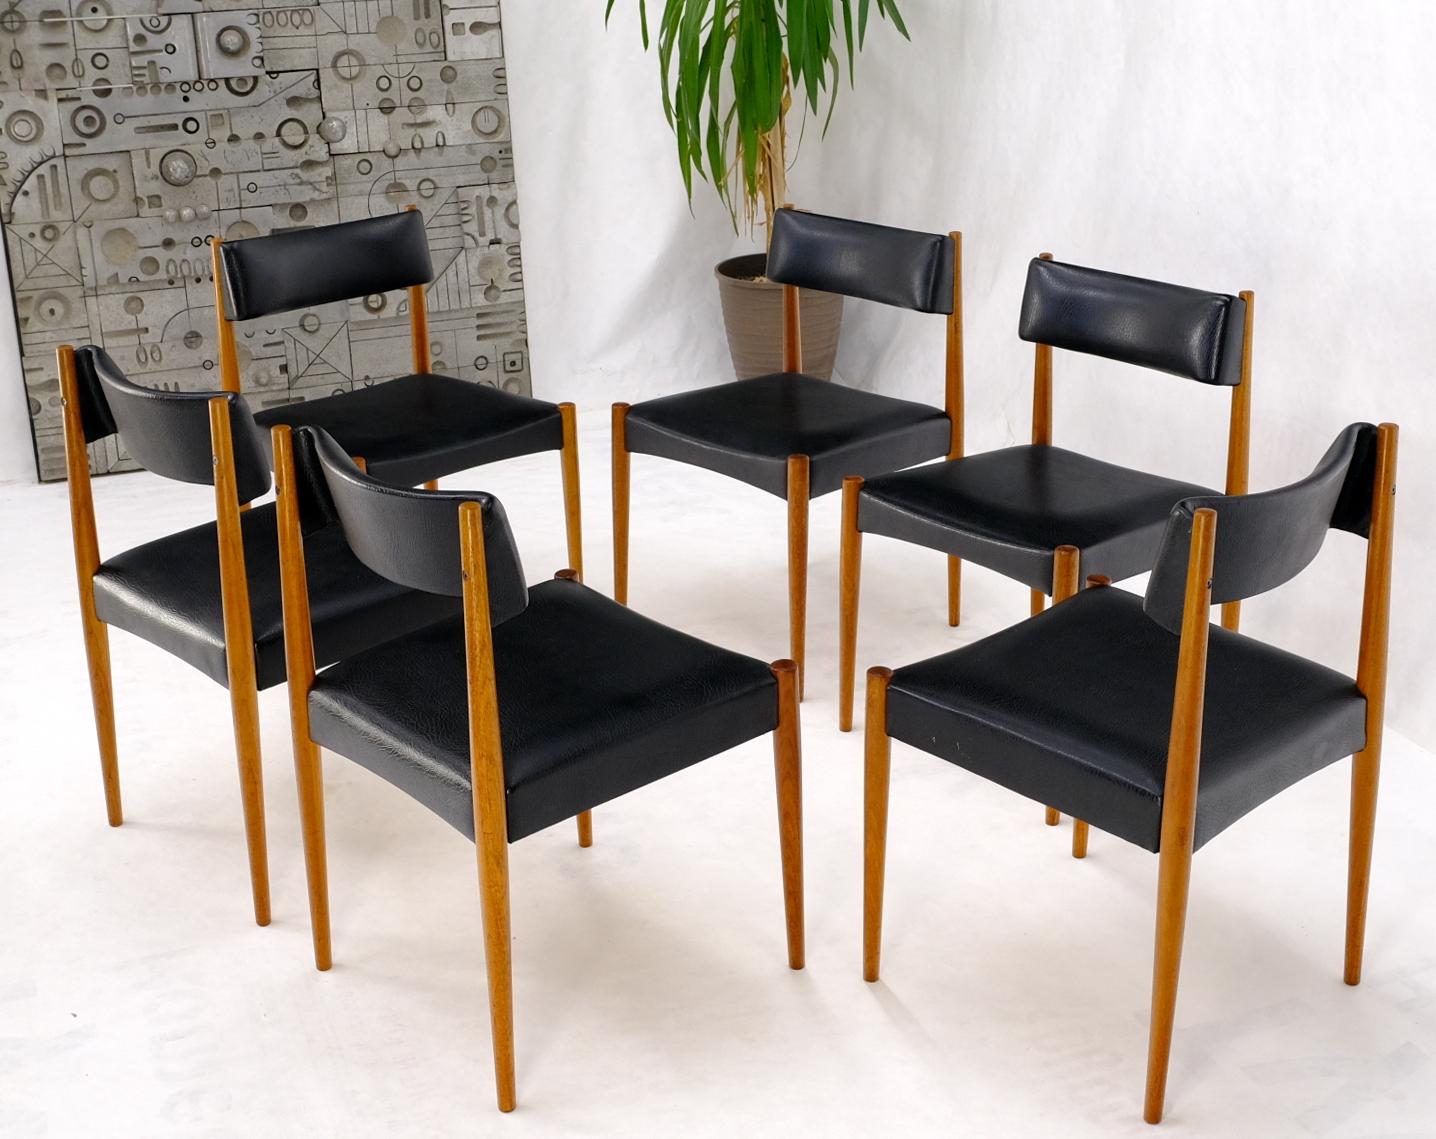 Set of 6 Danish Teak Mid Century Modern Dining Chairs in Black Upholstery In Good Condition For Sale In Rockaway, NJ